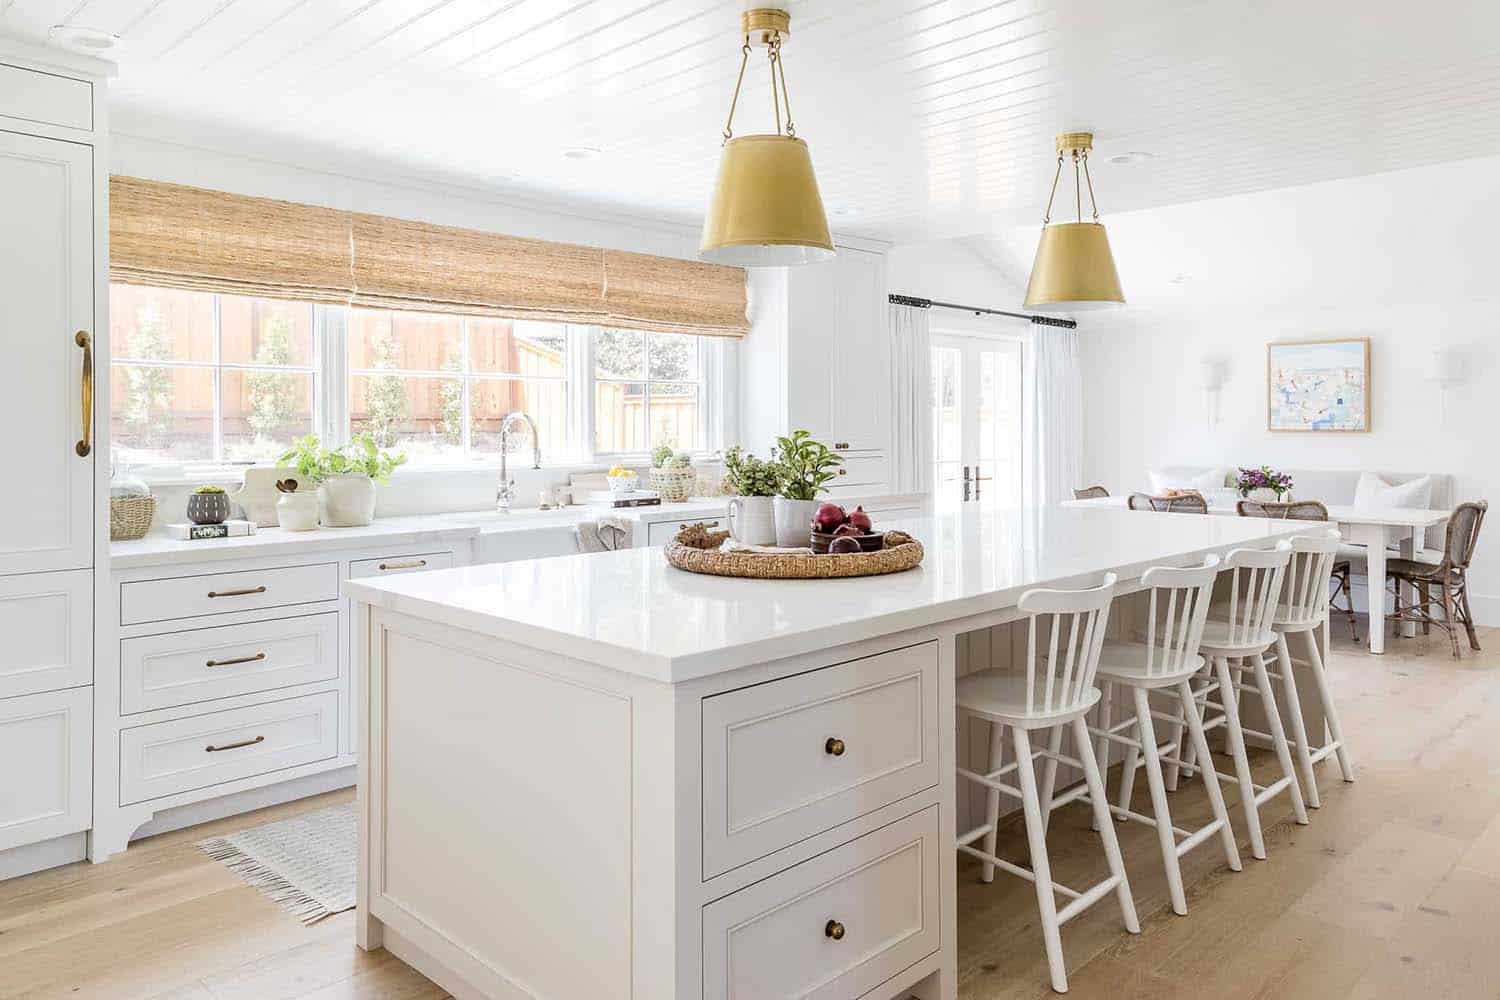 Take a peek inside this bright and airy coastal house remodel in Newport Beach